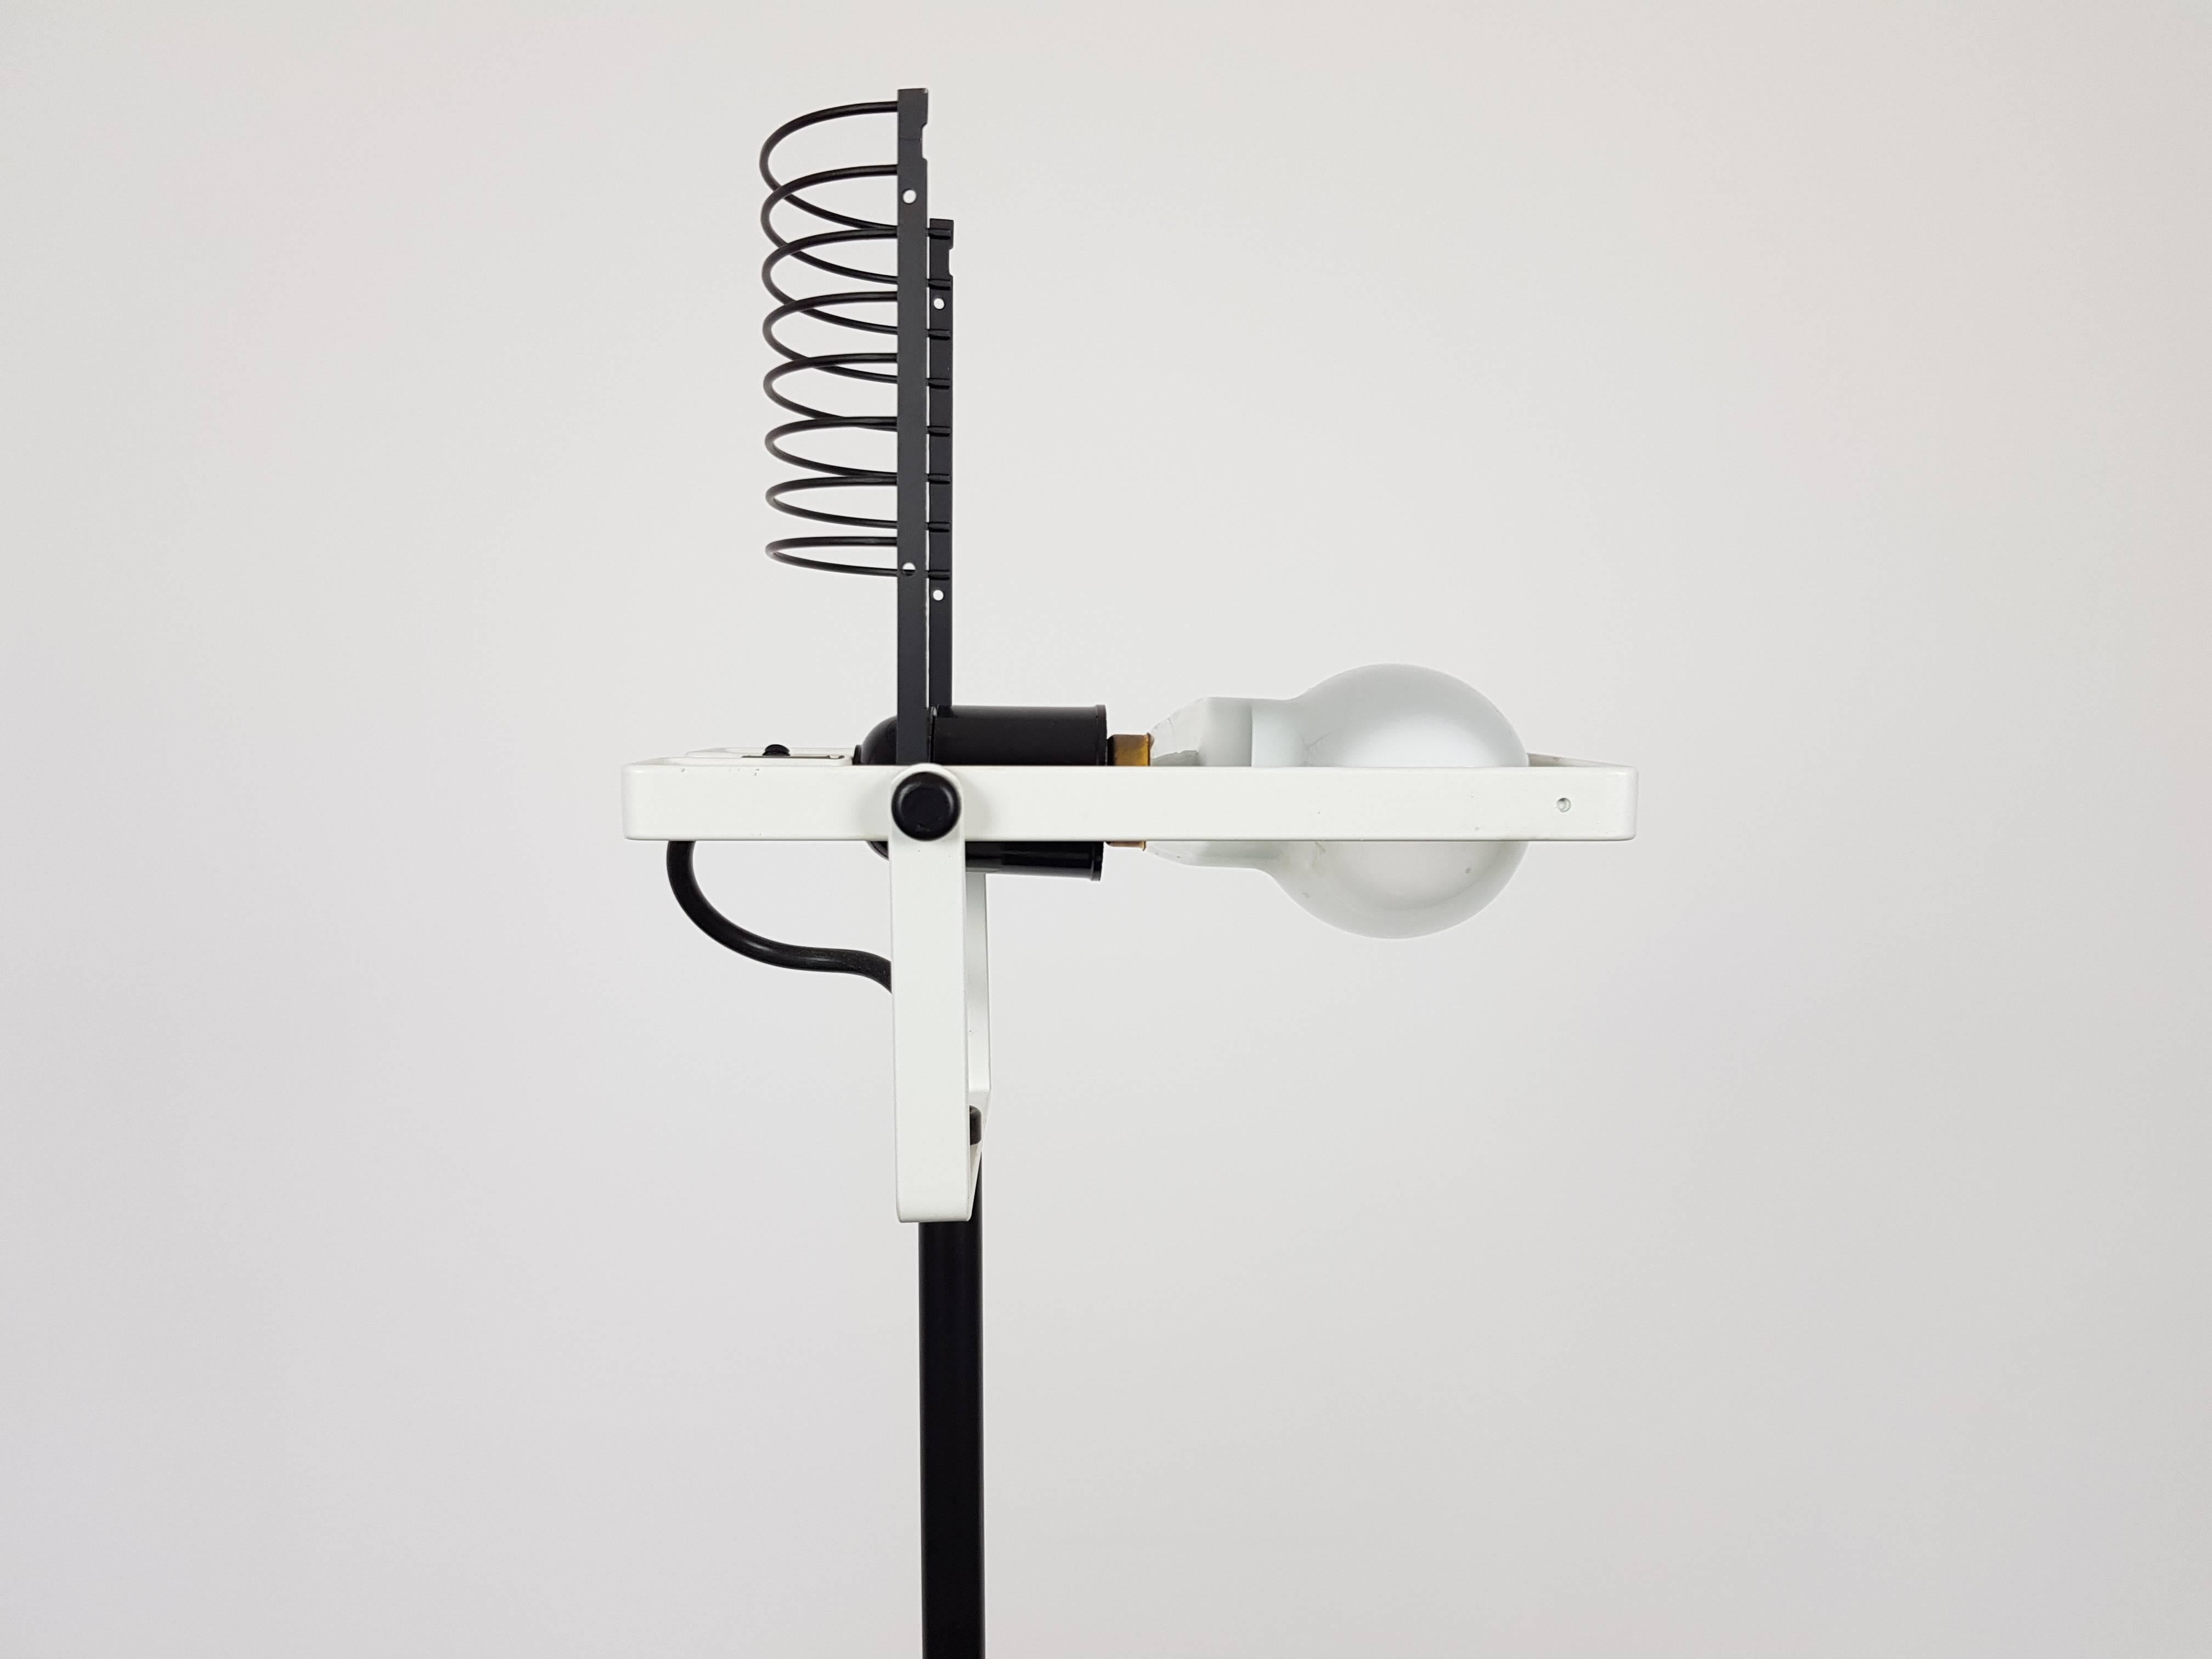 A rare first edition Ernesto Gismondi Sintesi terra white lacquered floor lamp, first edition with Cornalux bulb.
 
The lamp was designed in 1975 by Ernesto Gismondi for Artemide, later editions had an aluminium hood instead of the Cornalux bulb